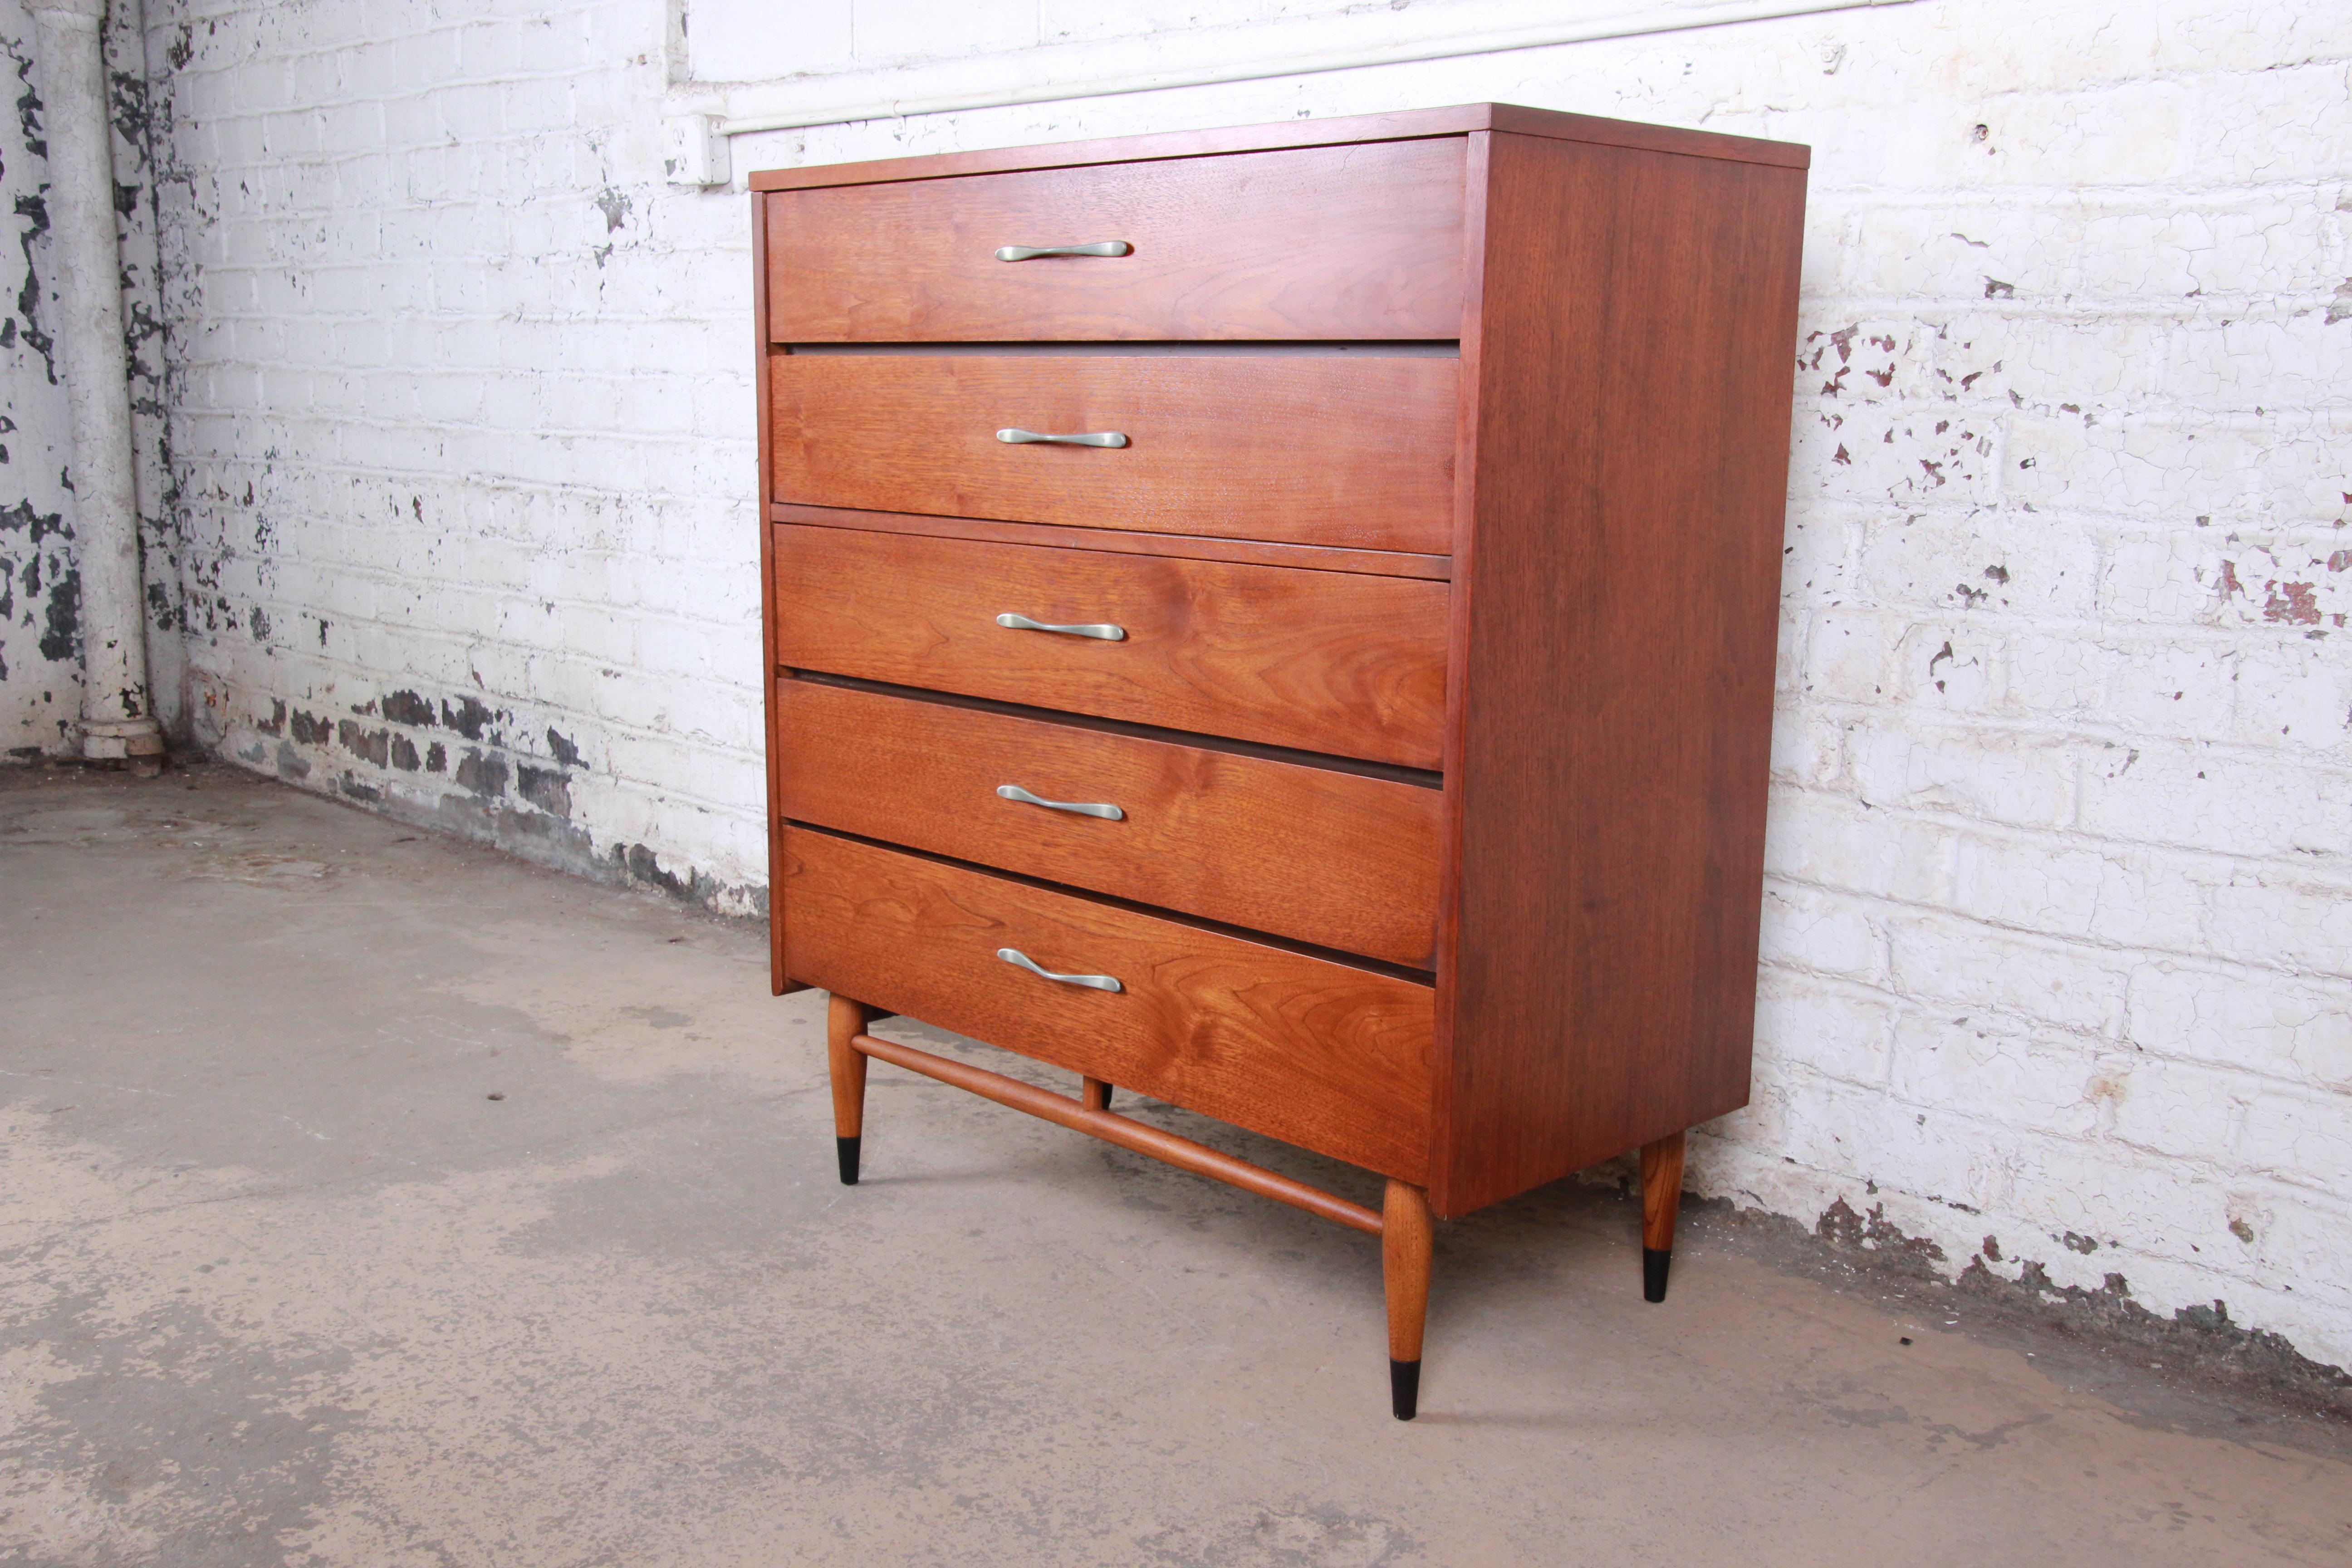 A gorgeous mid-century modern walnut and ash highboy dresser from the Acclaim line by Lane. The dresser features the signature ash dovetails, polished aluminum drawer pulls, and sleek mid-century design. It offers ample storage, with five dovetailed